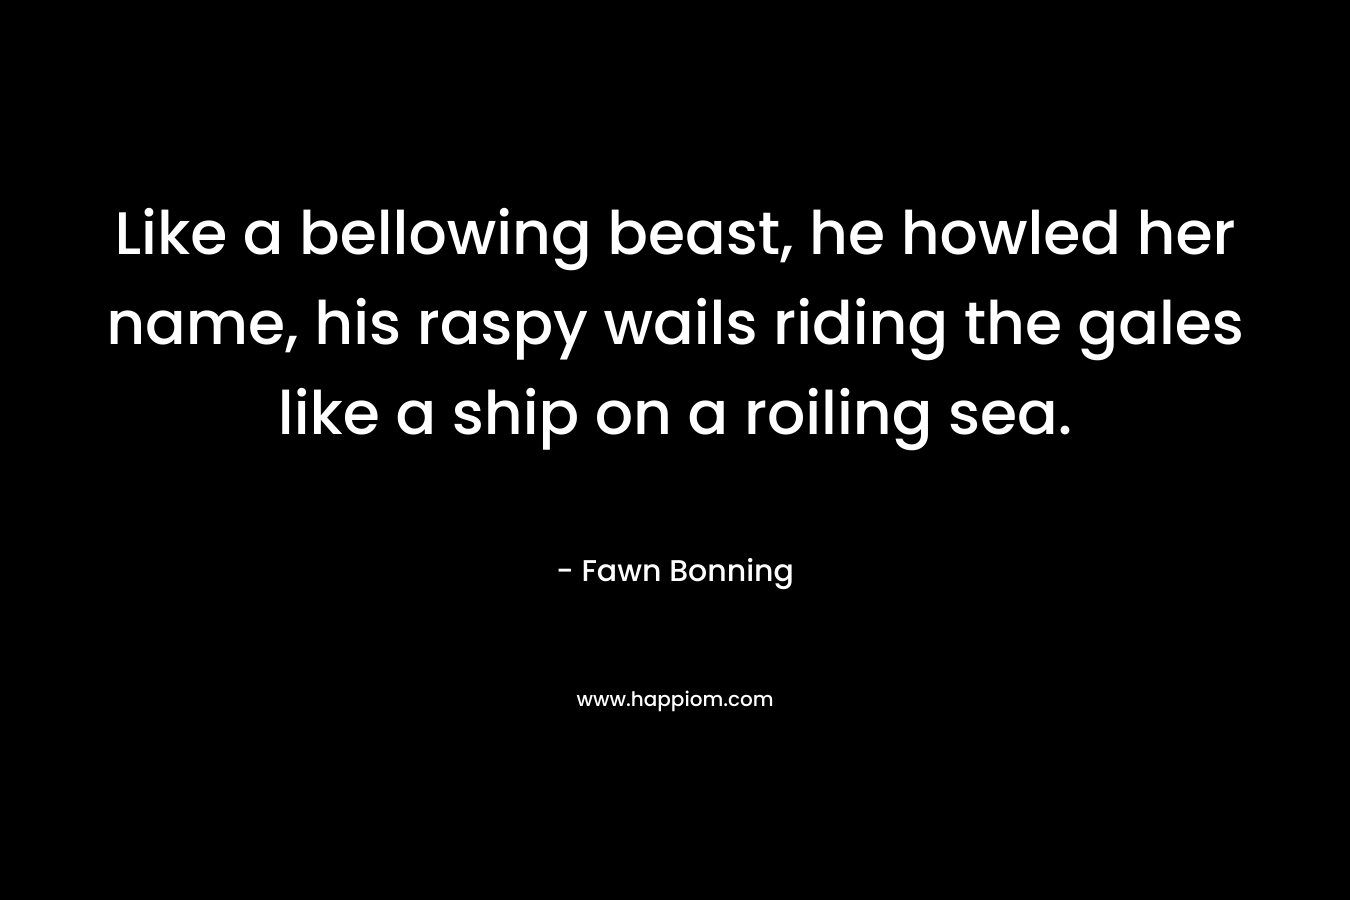 Like a bellowing beast, he howled her name, his raspy wails riding the gales like a ship on a roiling sea. – Fawn Bonning